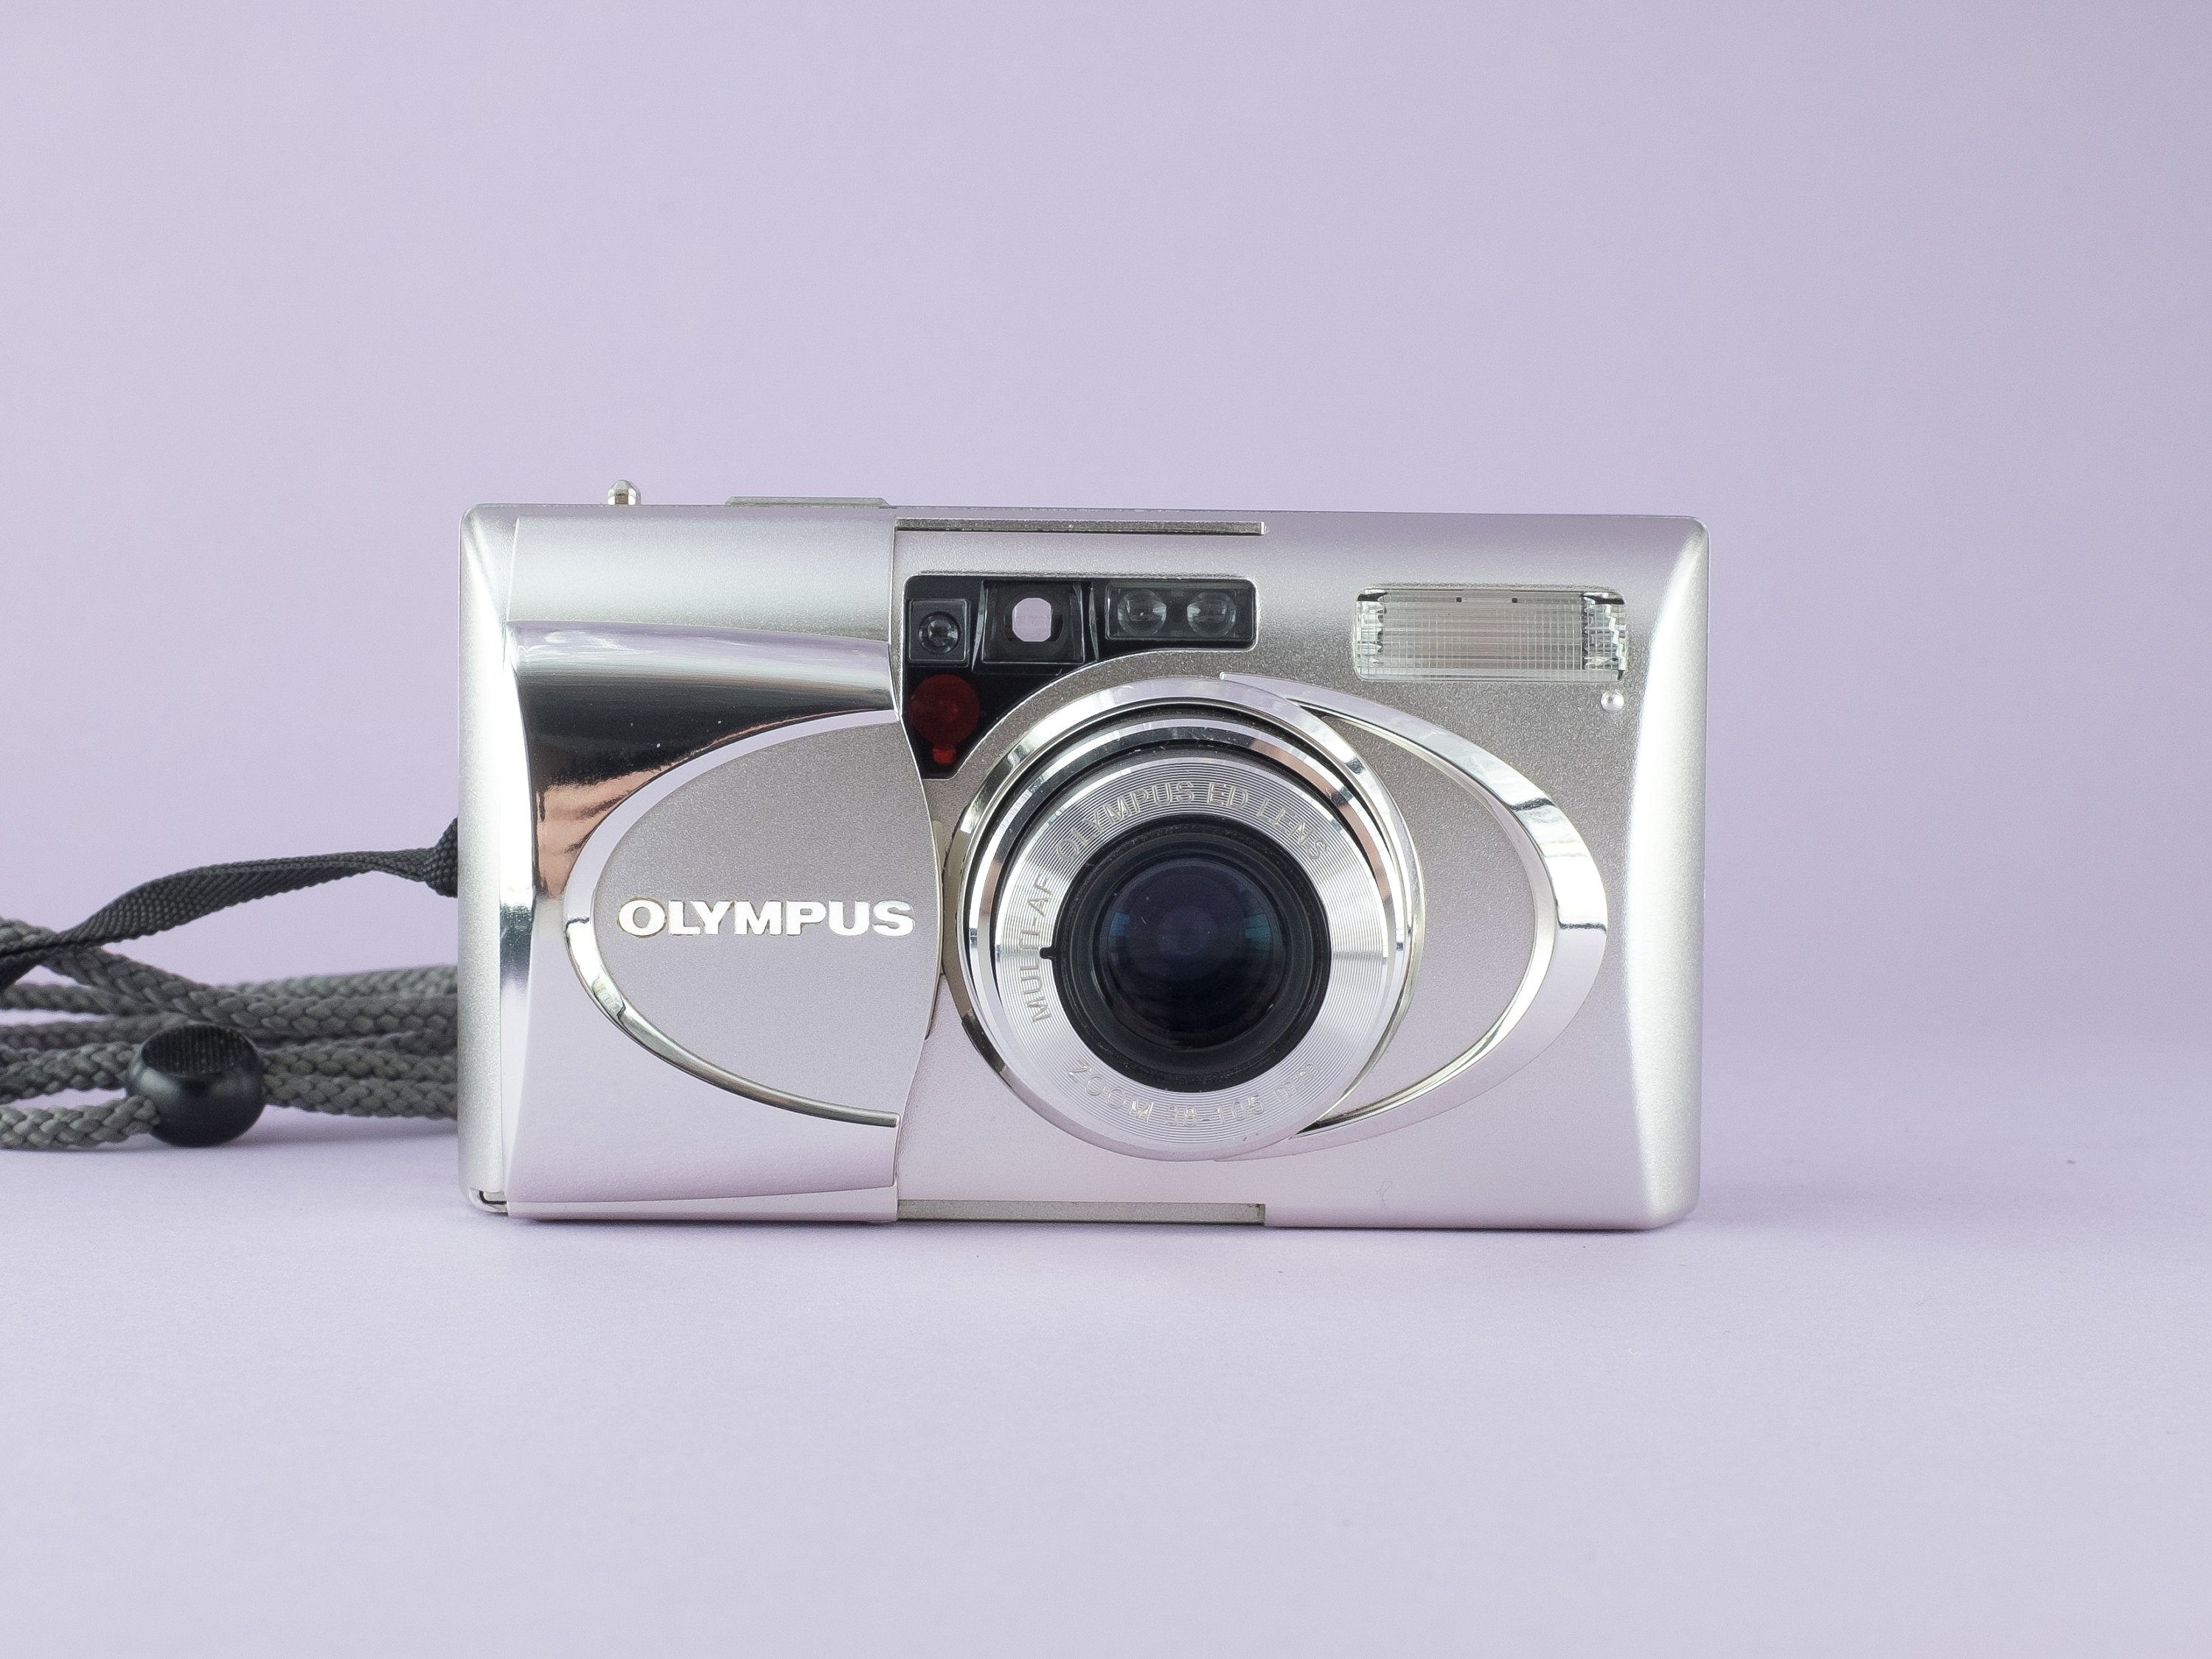 Olympus µ [mju:] V - World's Smallest 35mm Analog Film Compact Camera with  3x zoom - Great Condition